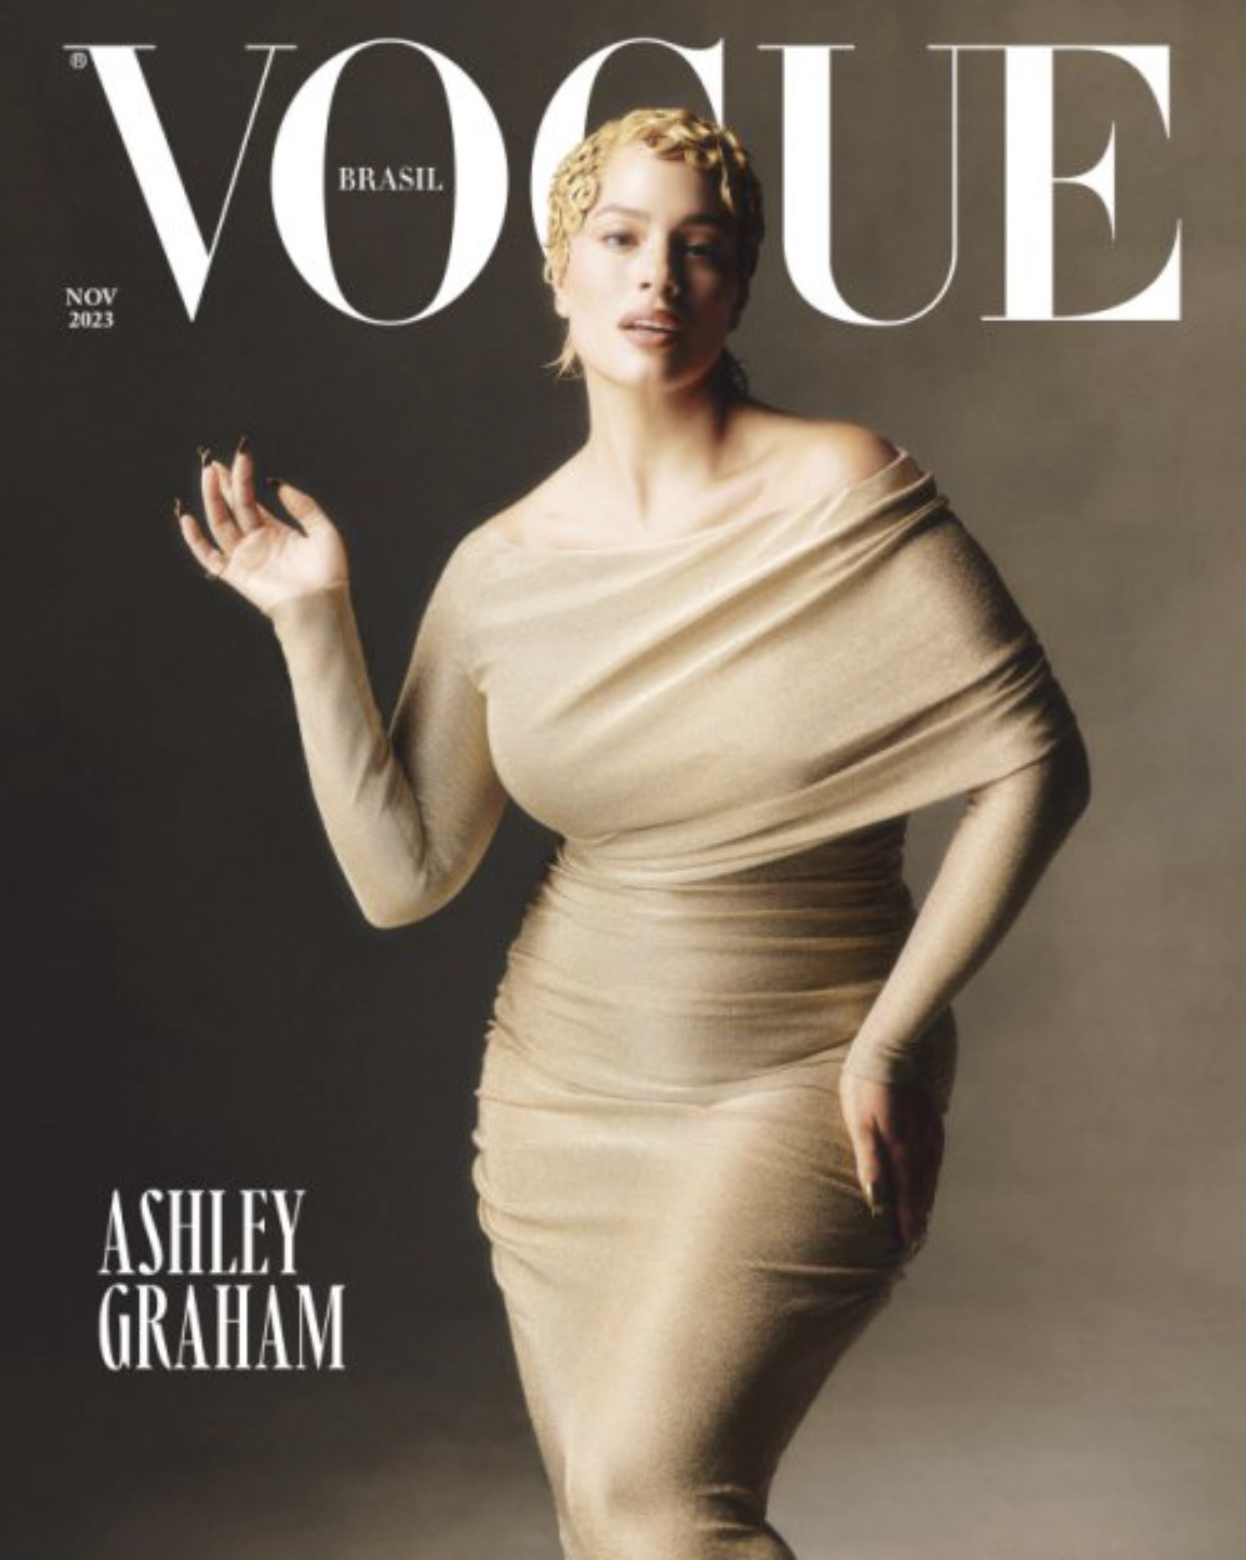 Ashley-Graham-by-Florentino-and-Yule-for-Vogue-Brazil-November-2023-2.png